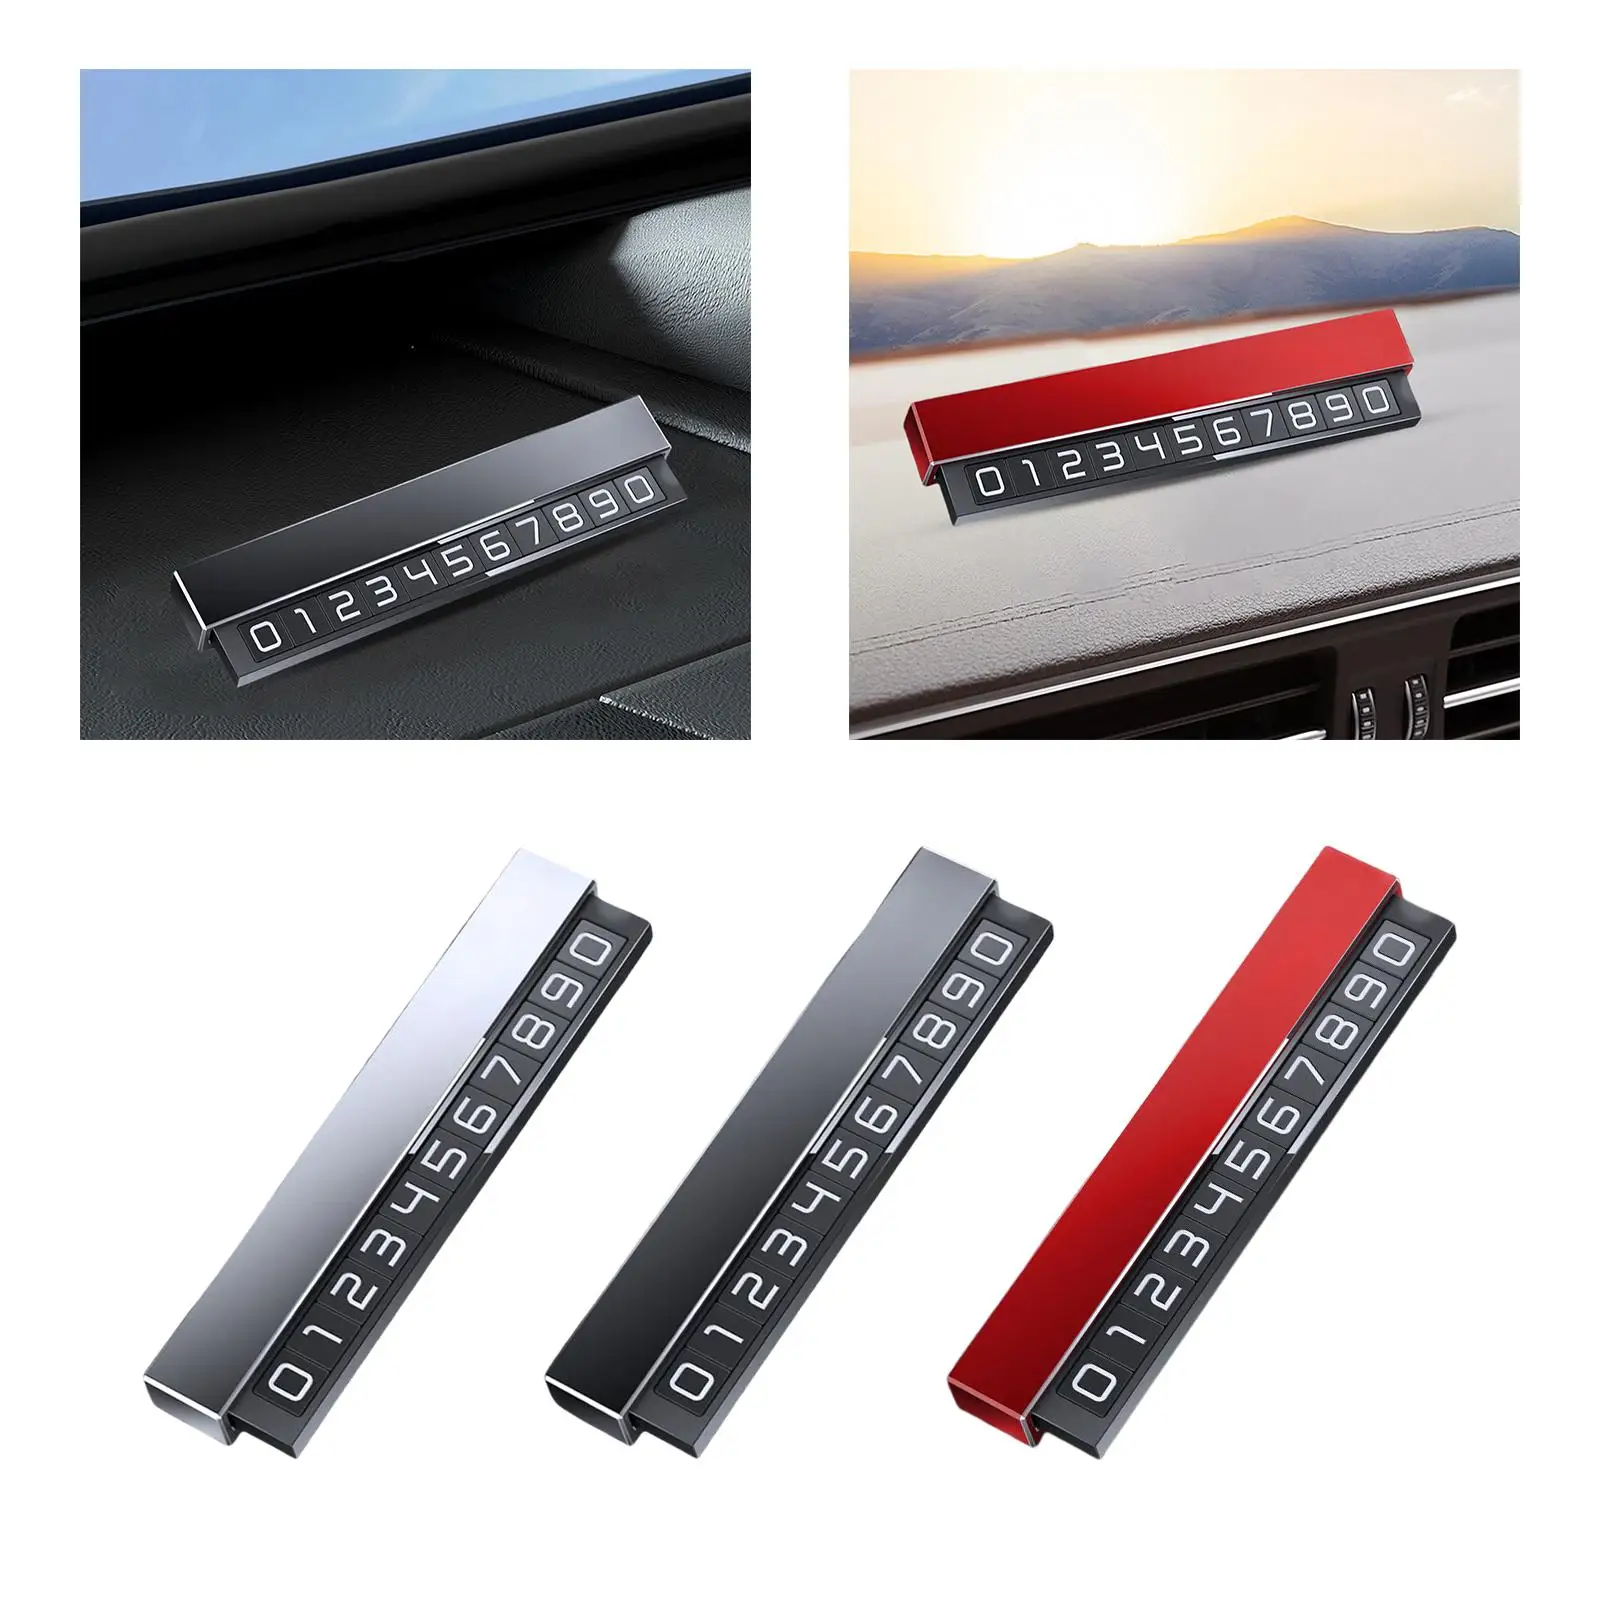 Parking Number Plate Car Styling Parts Hidden Moving Creative Luminous phone Number Card Plate for Cars Dashboard